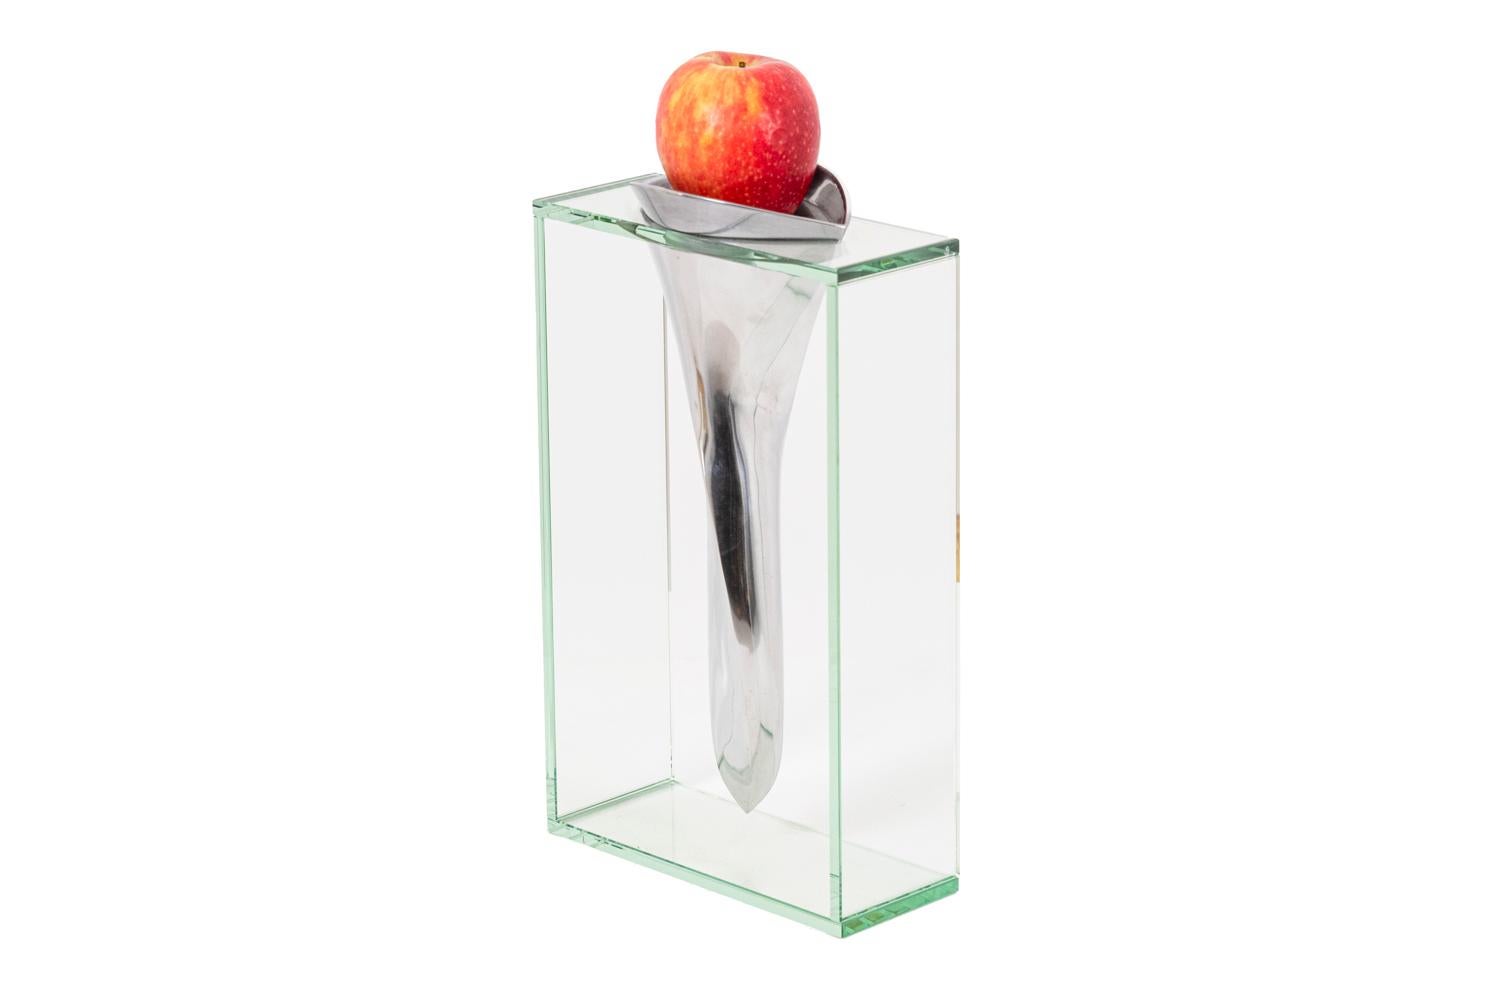 Lisa Mori, attributed. 

Vase with an organic shape in polished cast aluminum is suspended in rectangular structure in glass.

Work realized in the 1980s.